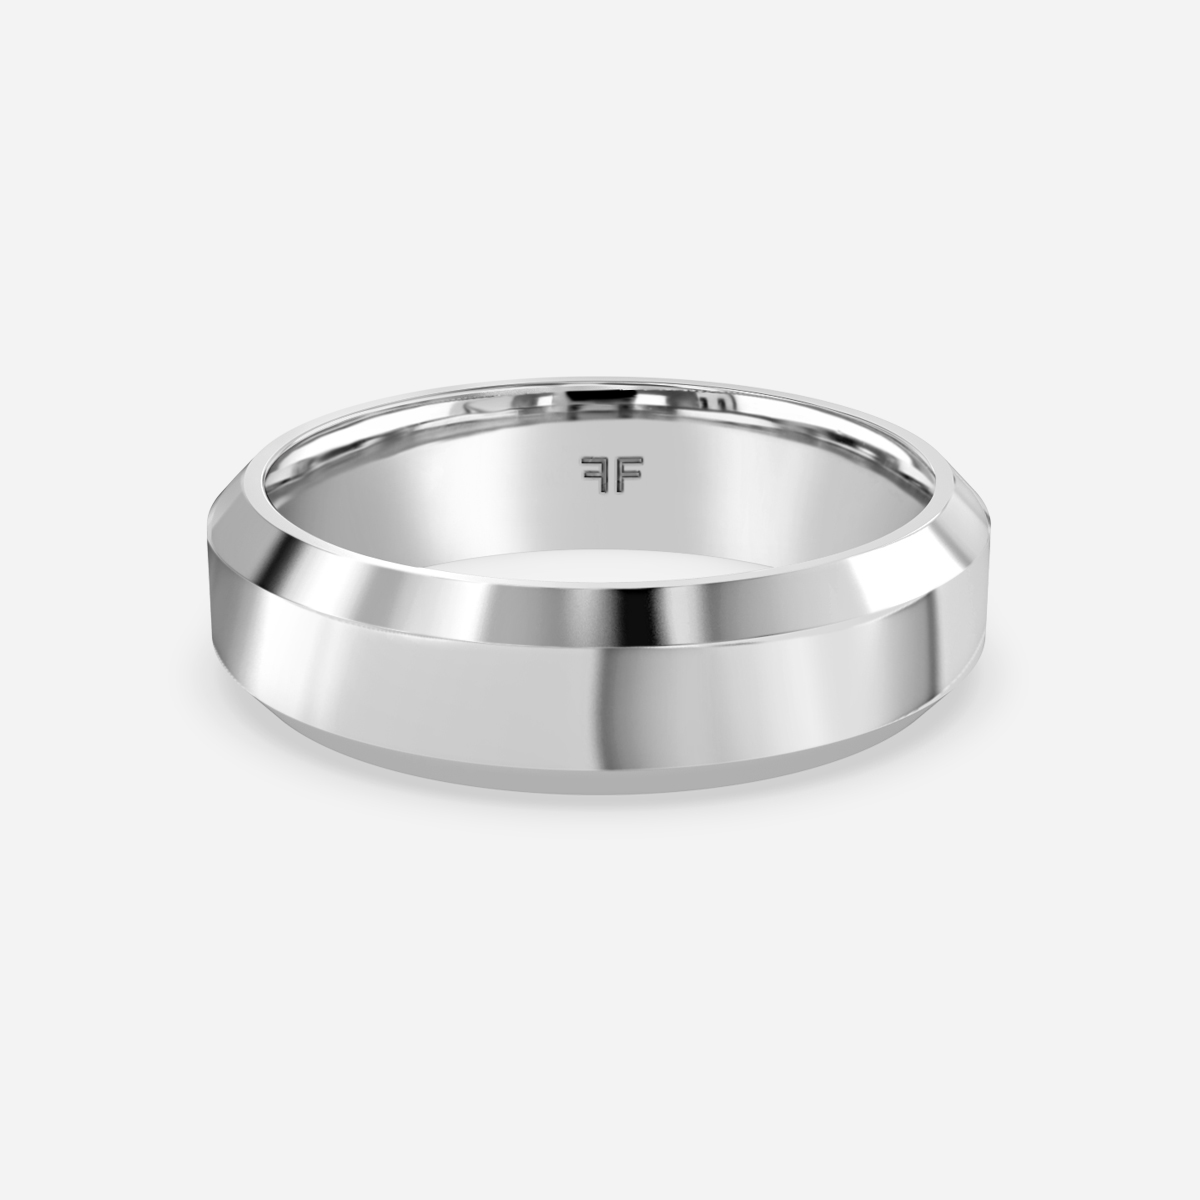 Gents 5mm White Gold Wedding Ring